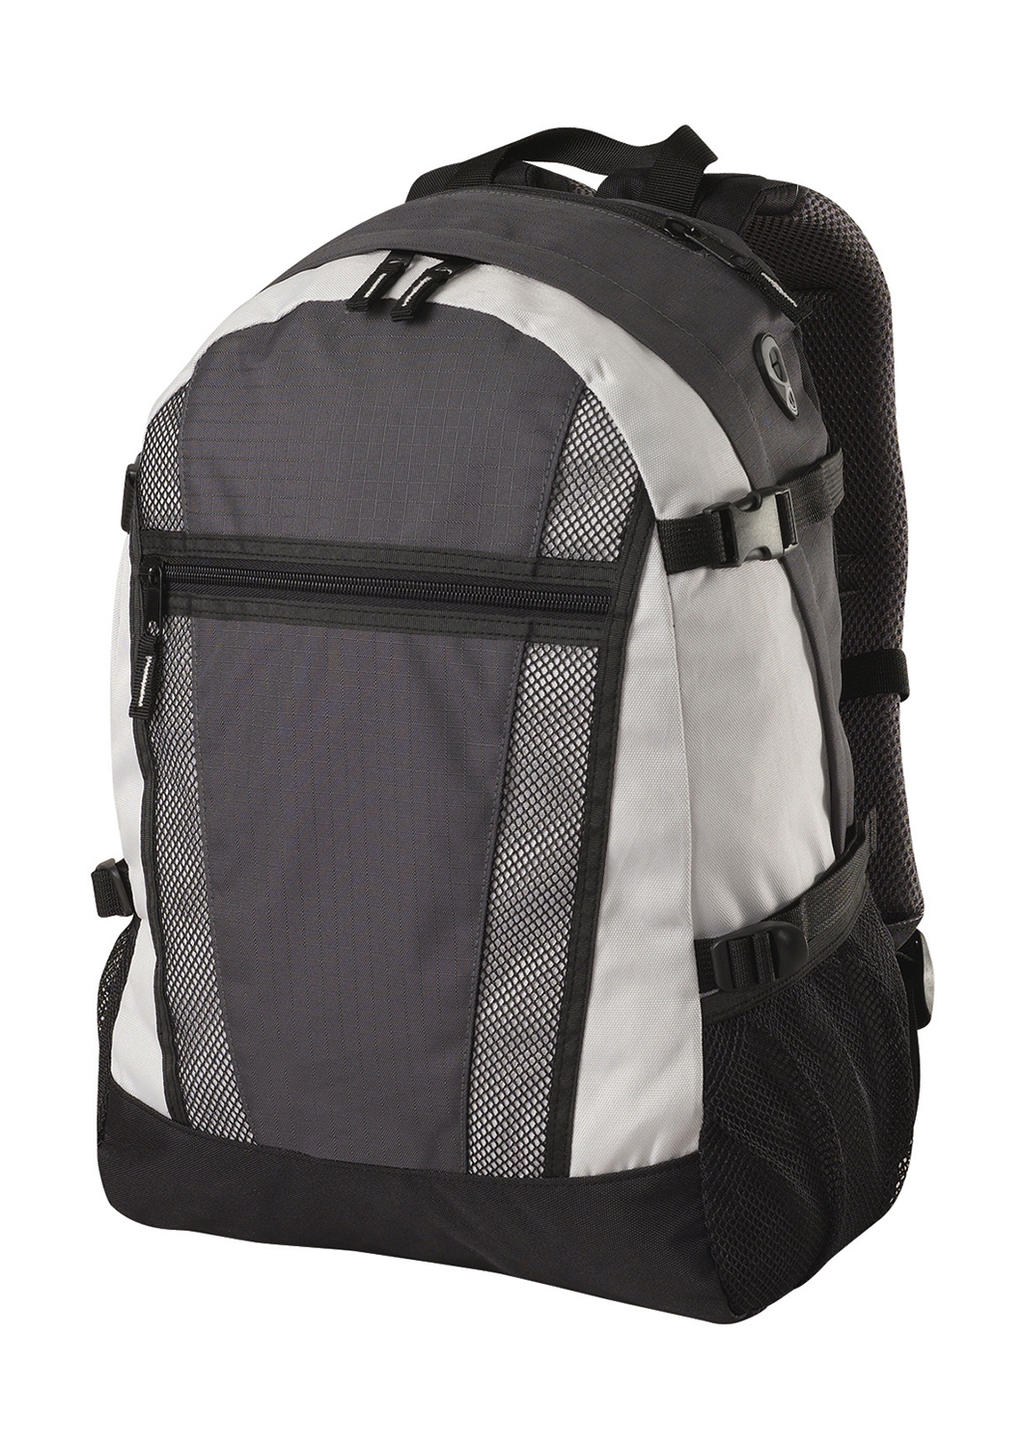  Indiana Student/ Sports Backpack in Farbe Dark Grey/Off White